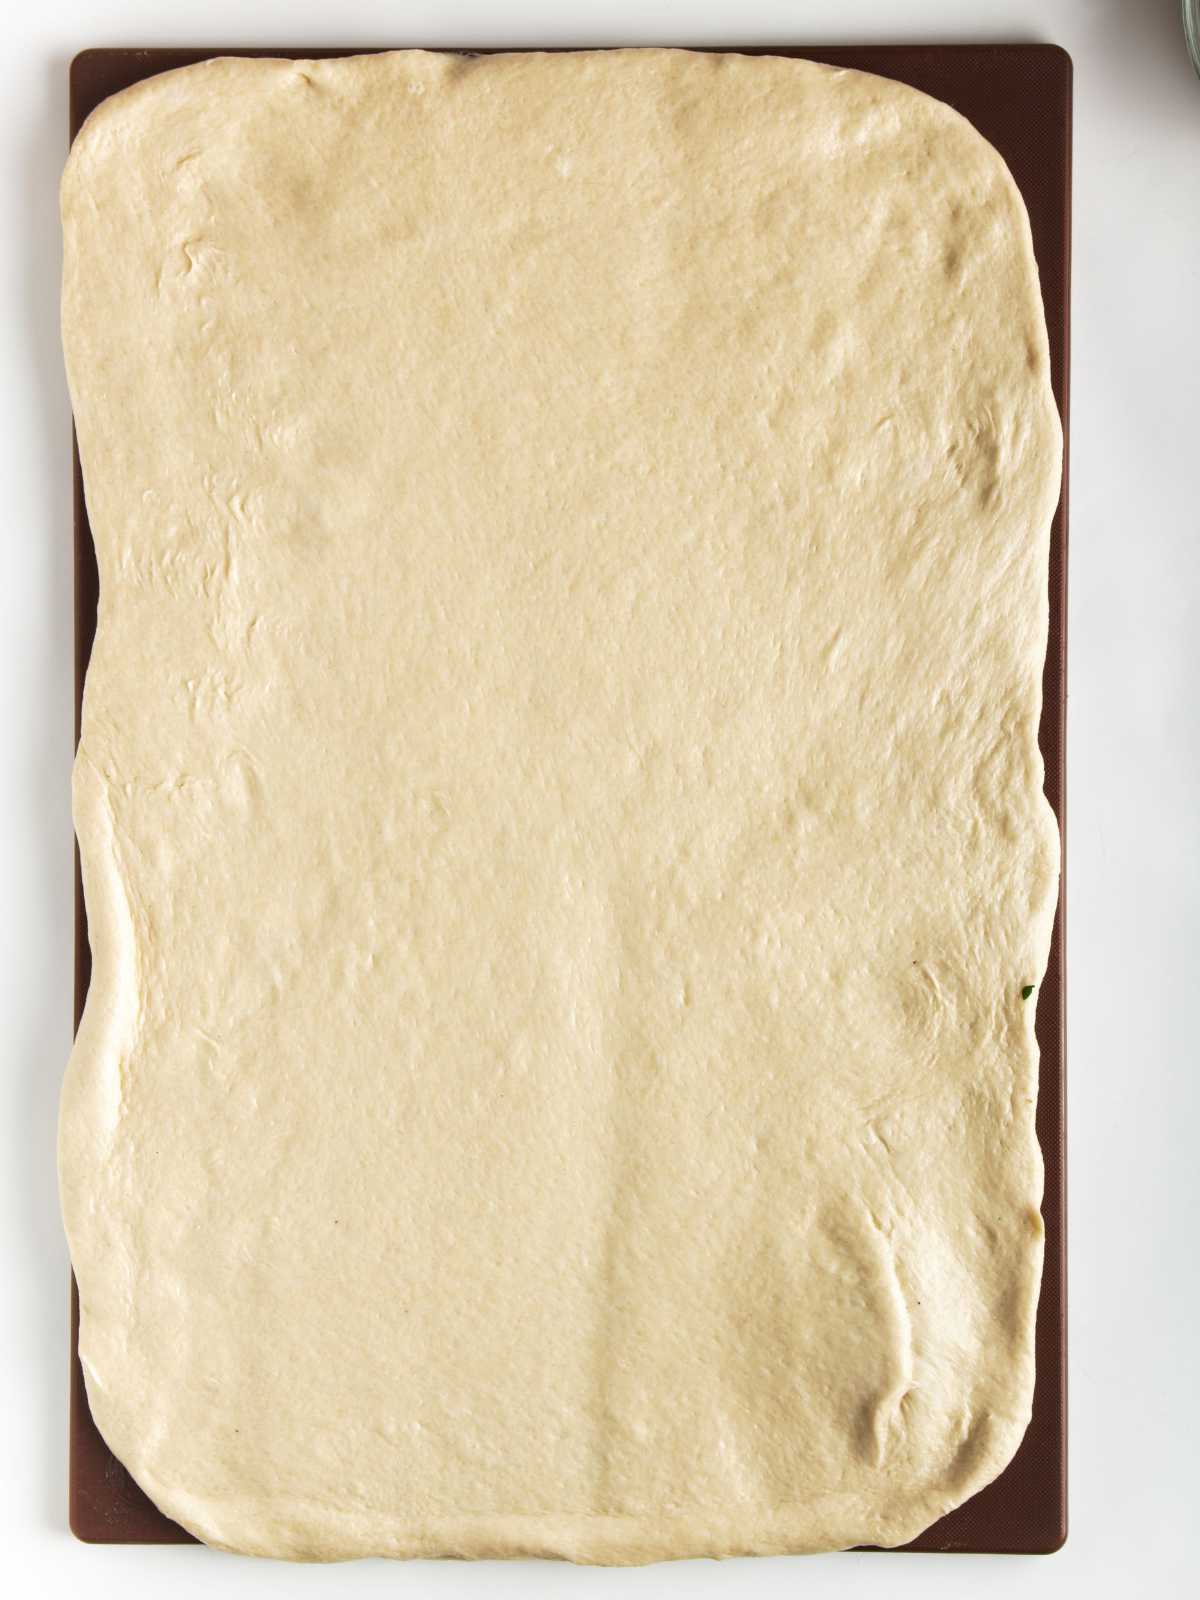 risen sweet bread dough rolled out into a large rectangle shape.